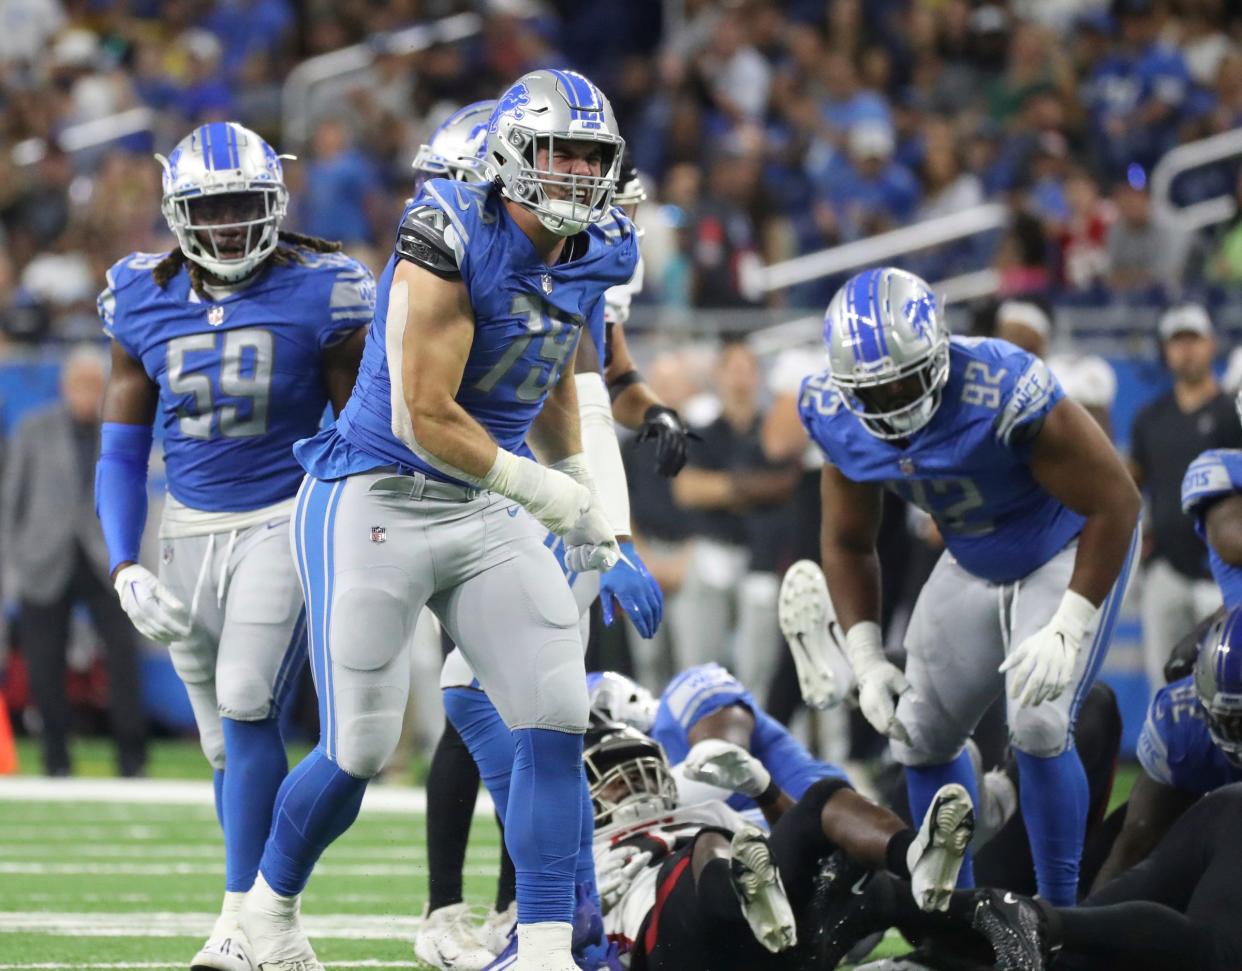 Lions defensive end John Cominsky celebrates after making a tackle against the Falcons during the second half of the Lions' 27-23 preseason loss to the Falcons on Friday, Aug. 12, 2022 at Ford Field.